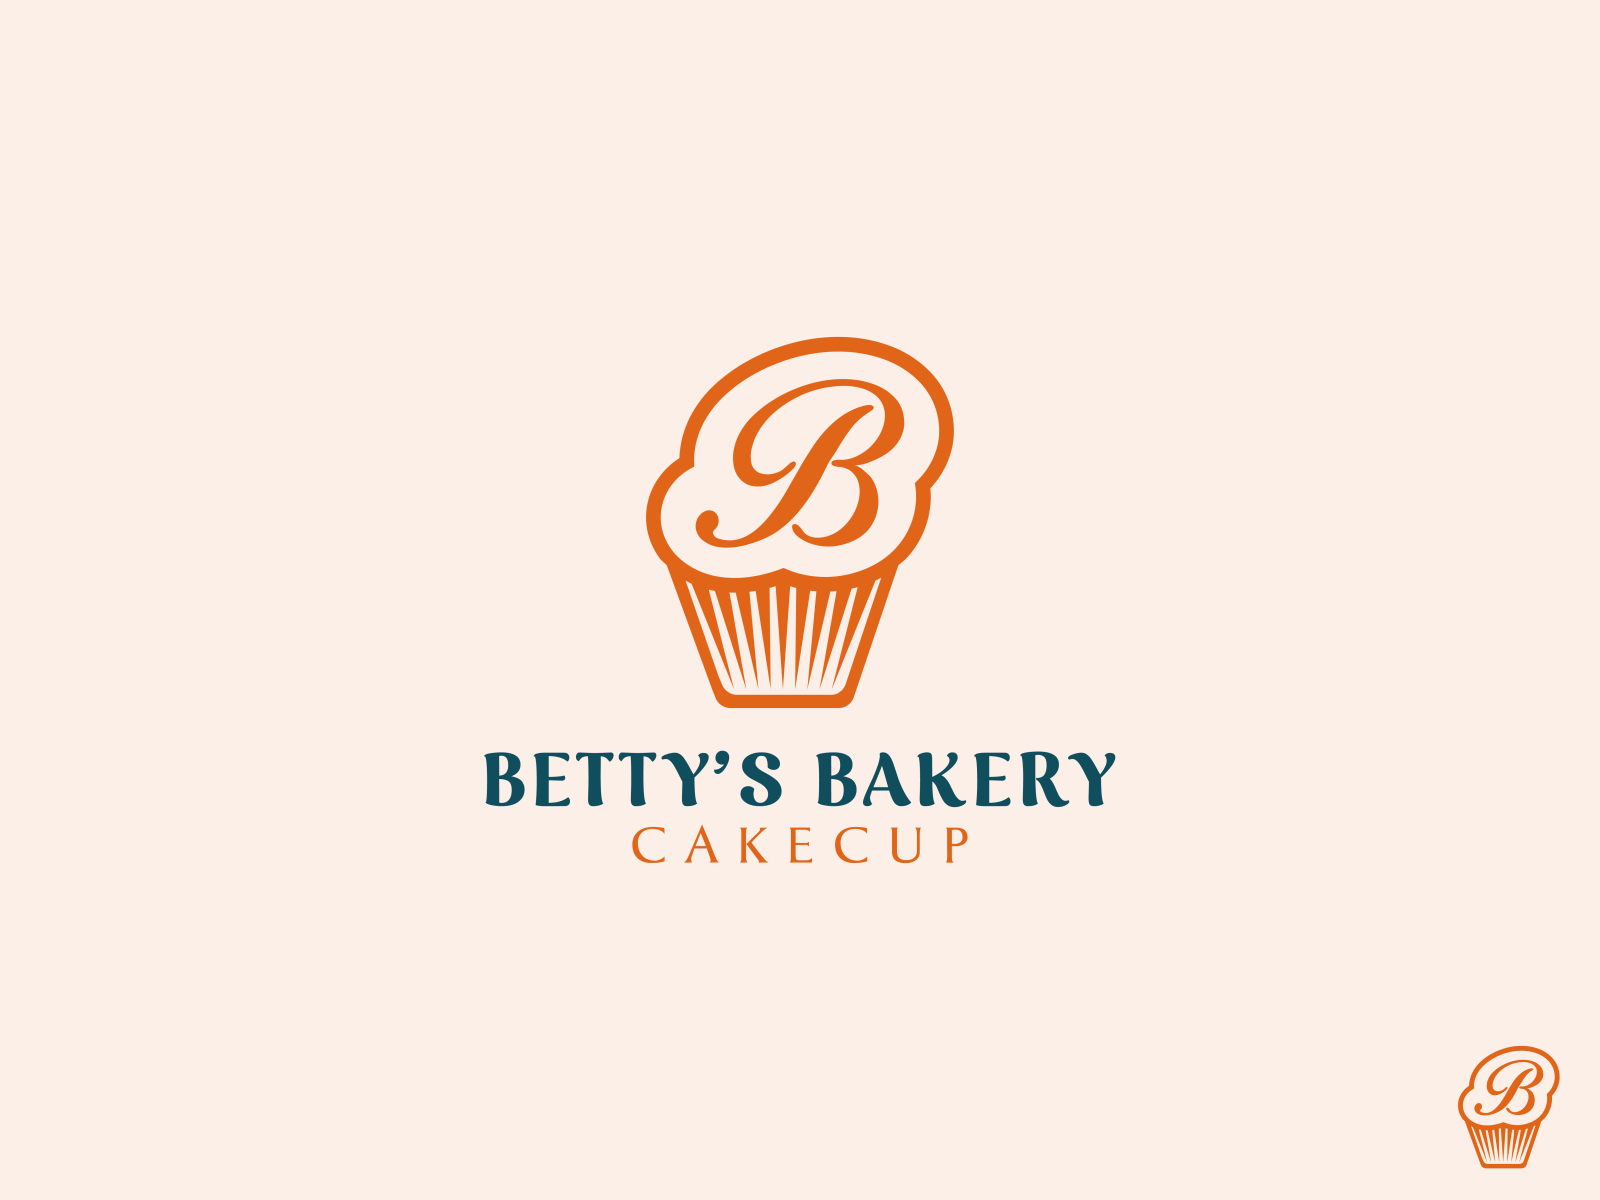 47 Bakery Logo Concepts and Ideas